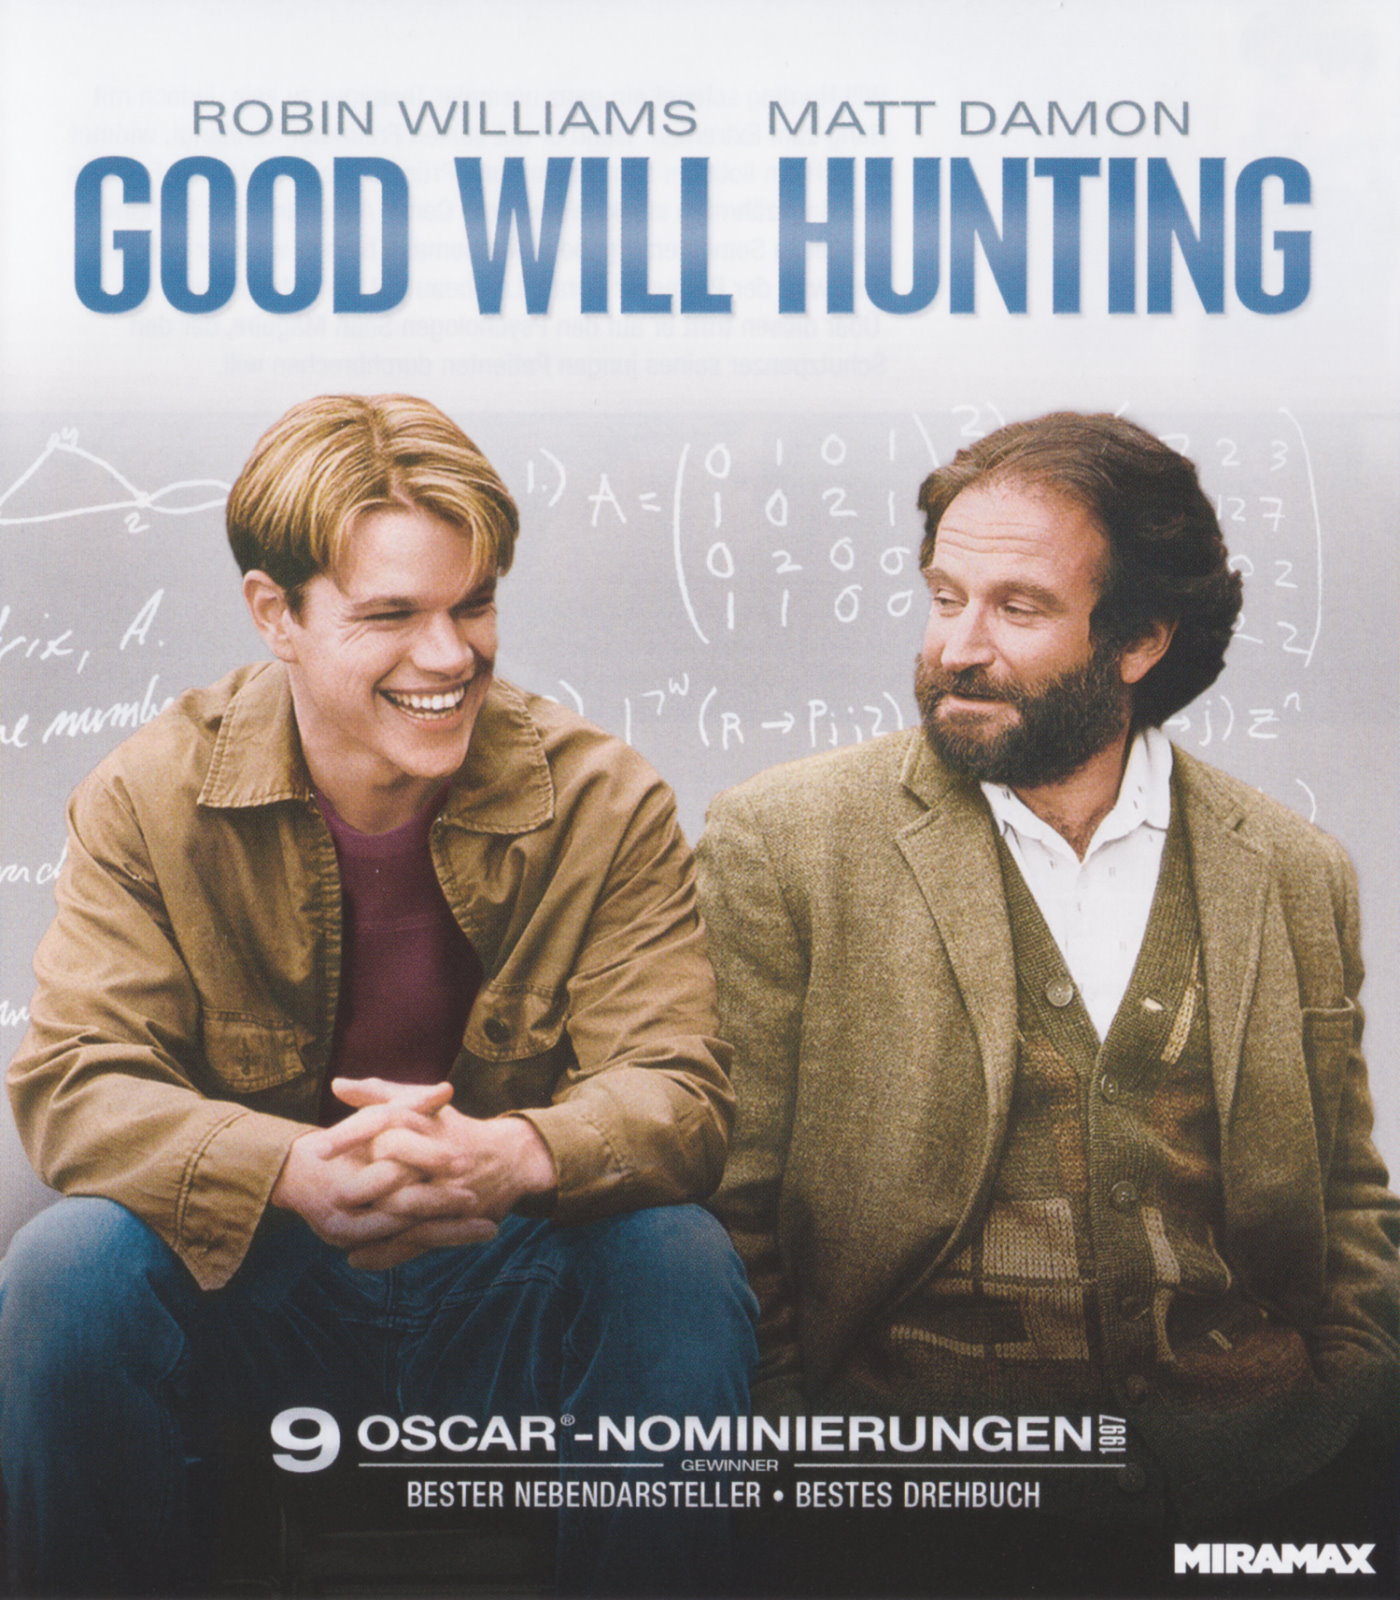 Cover - Good Will Hunting.jpg